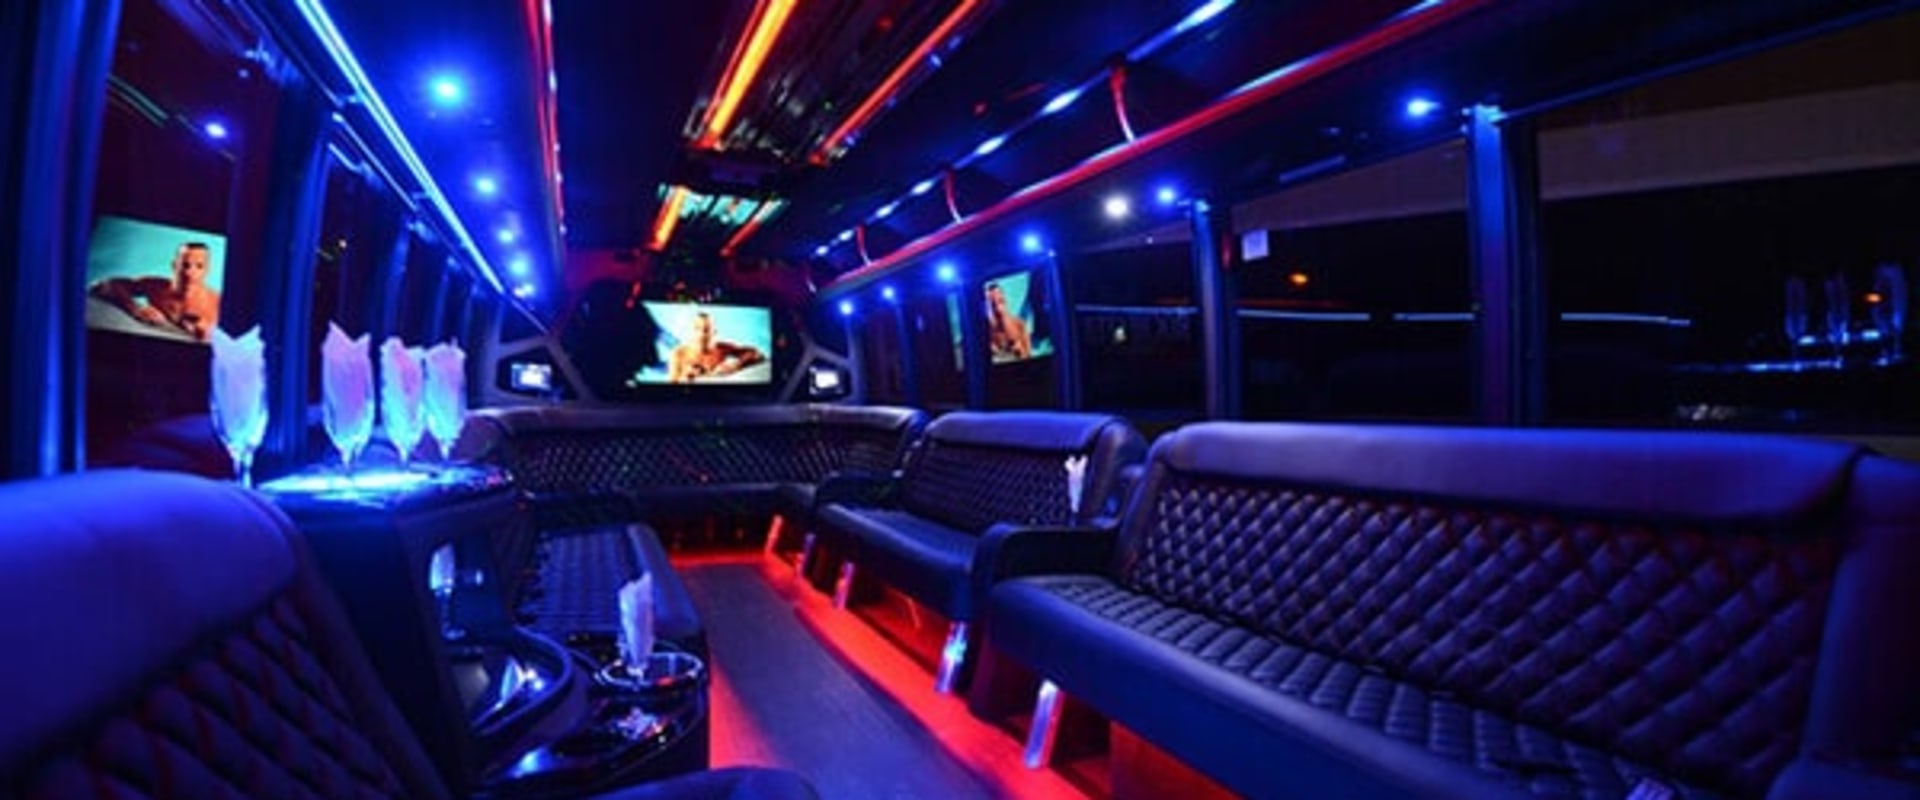 How does a party bus work?